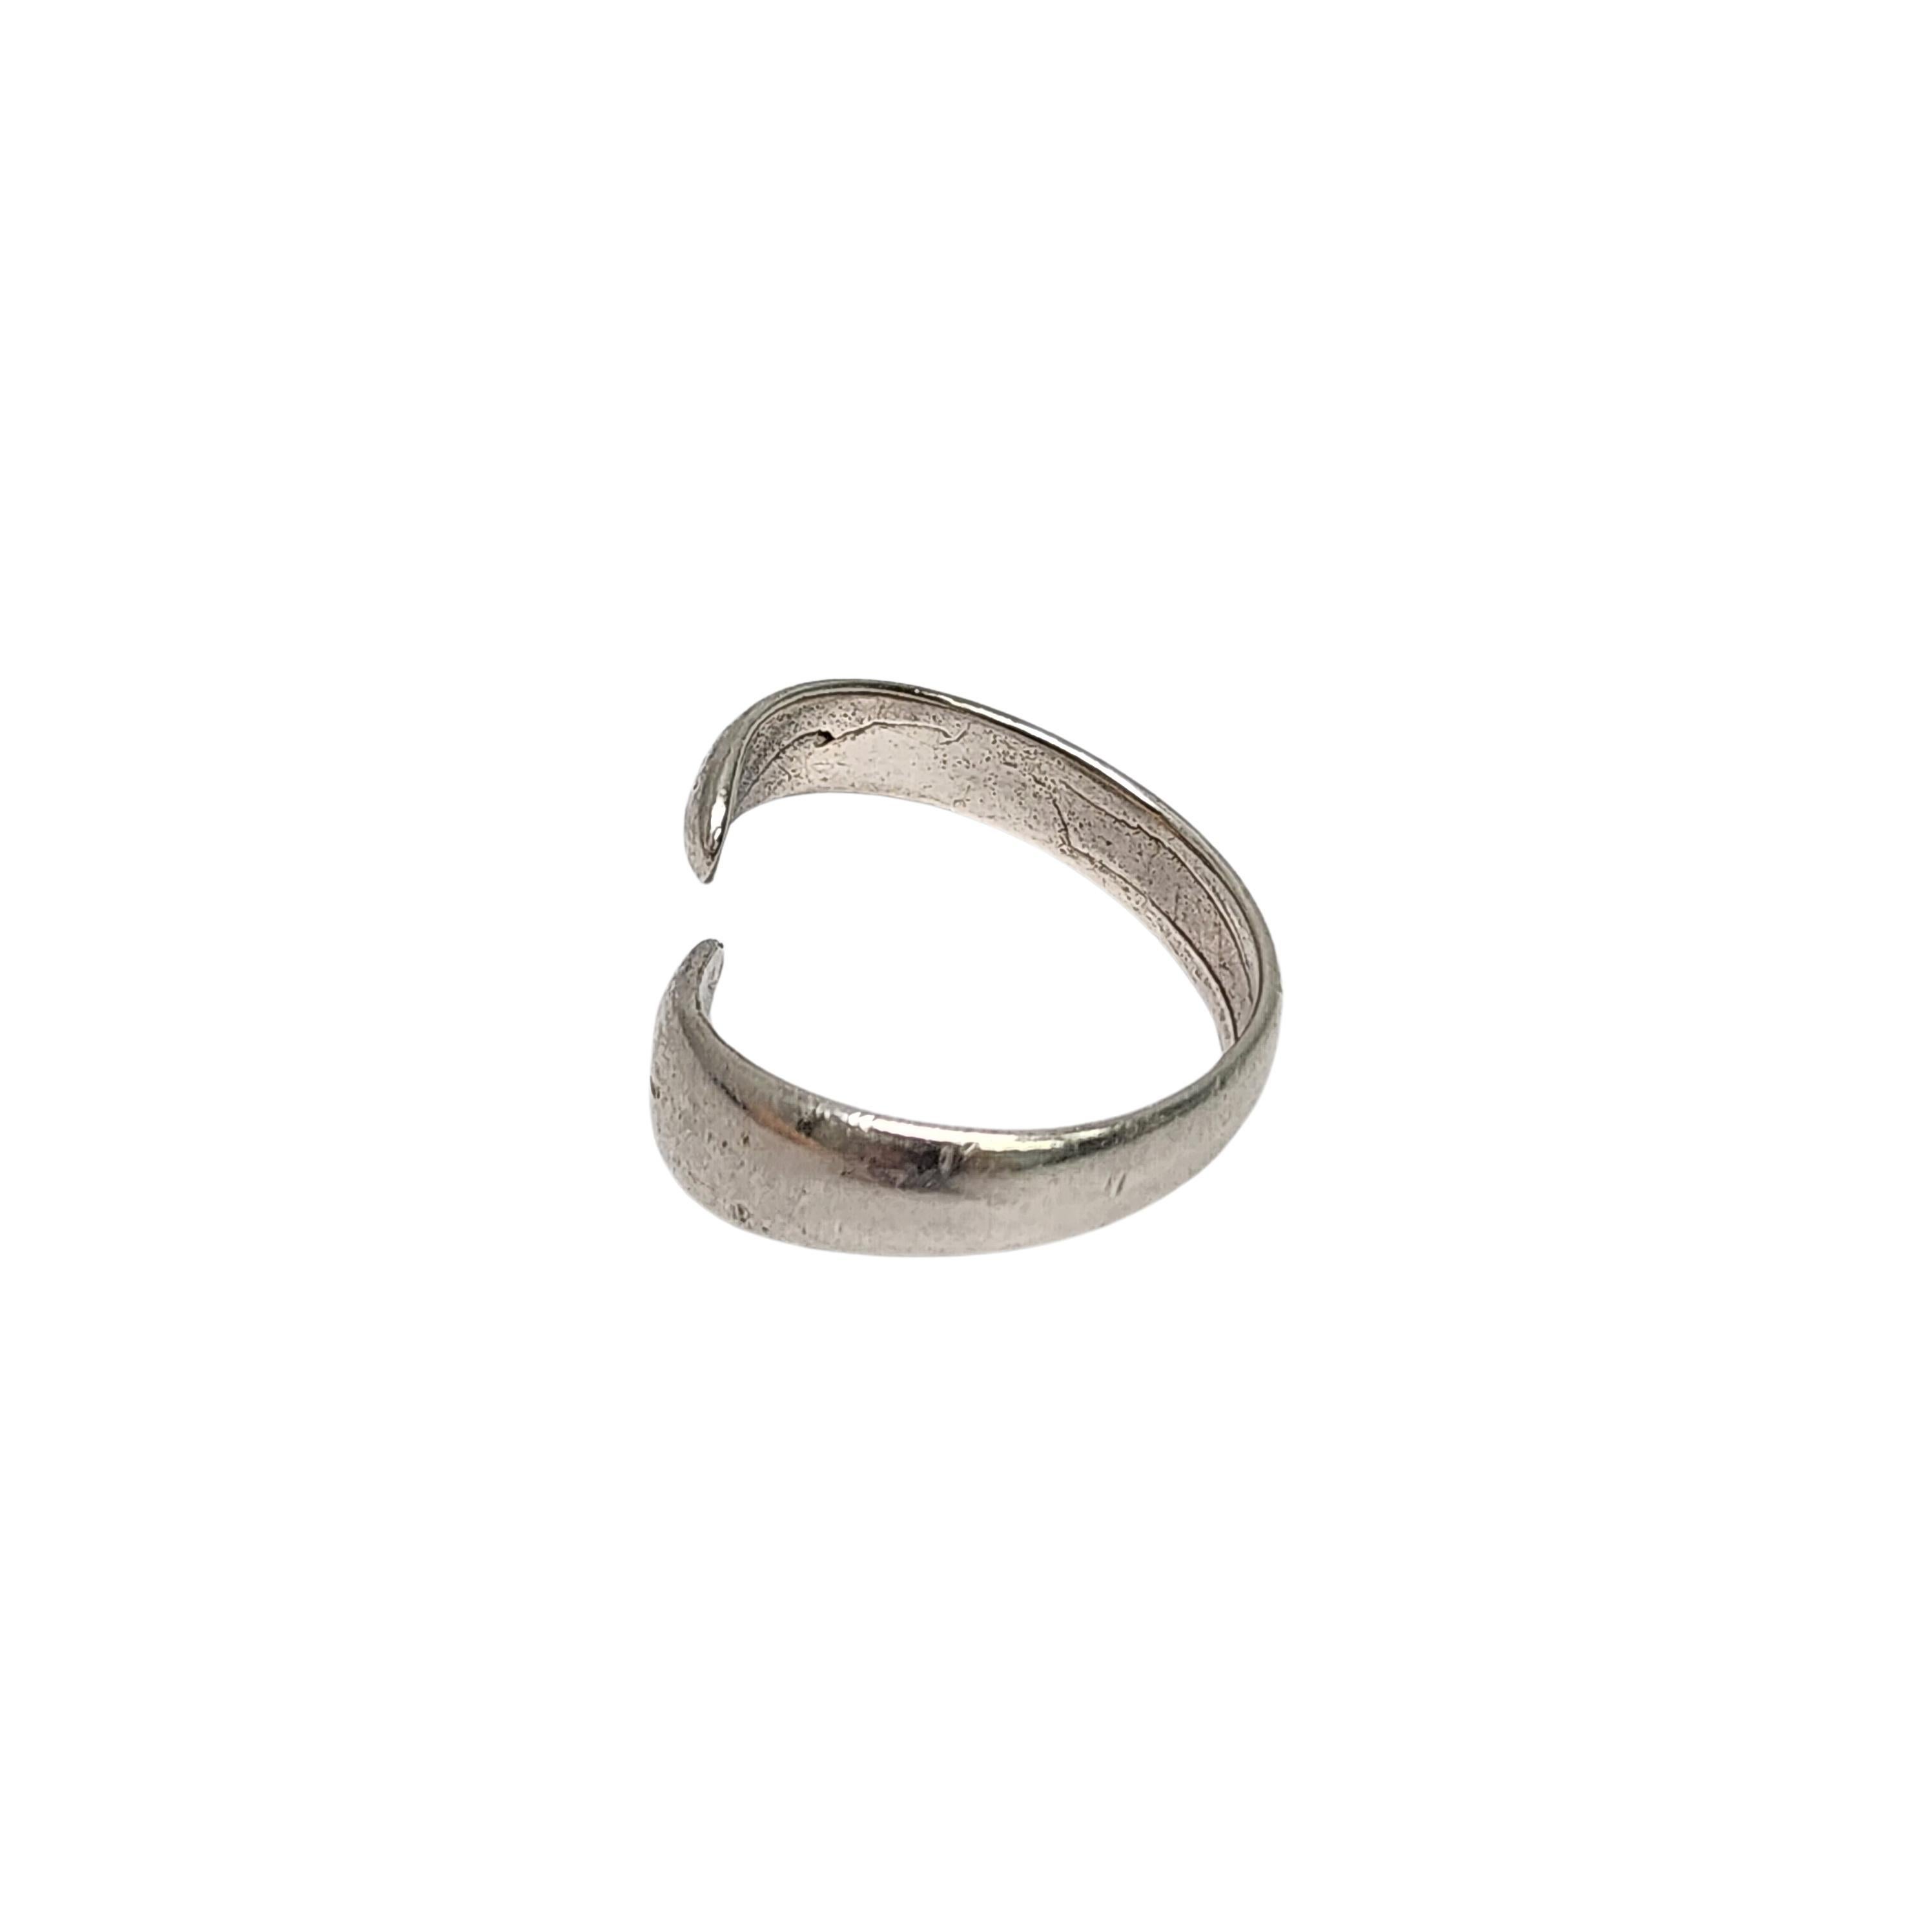 Sterling silver bypass ring by Buch & Deichmann of Denmark.

Size 7 1/2 (may be adjustable because of the bypass design)

This sterling silver ring features a bypass design by Danish designer B&D (Buch & Deichmann), 1969-85.

Weighs approx 3.7g,